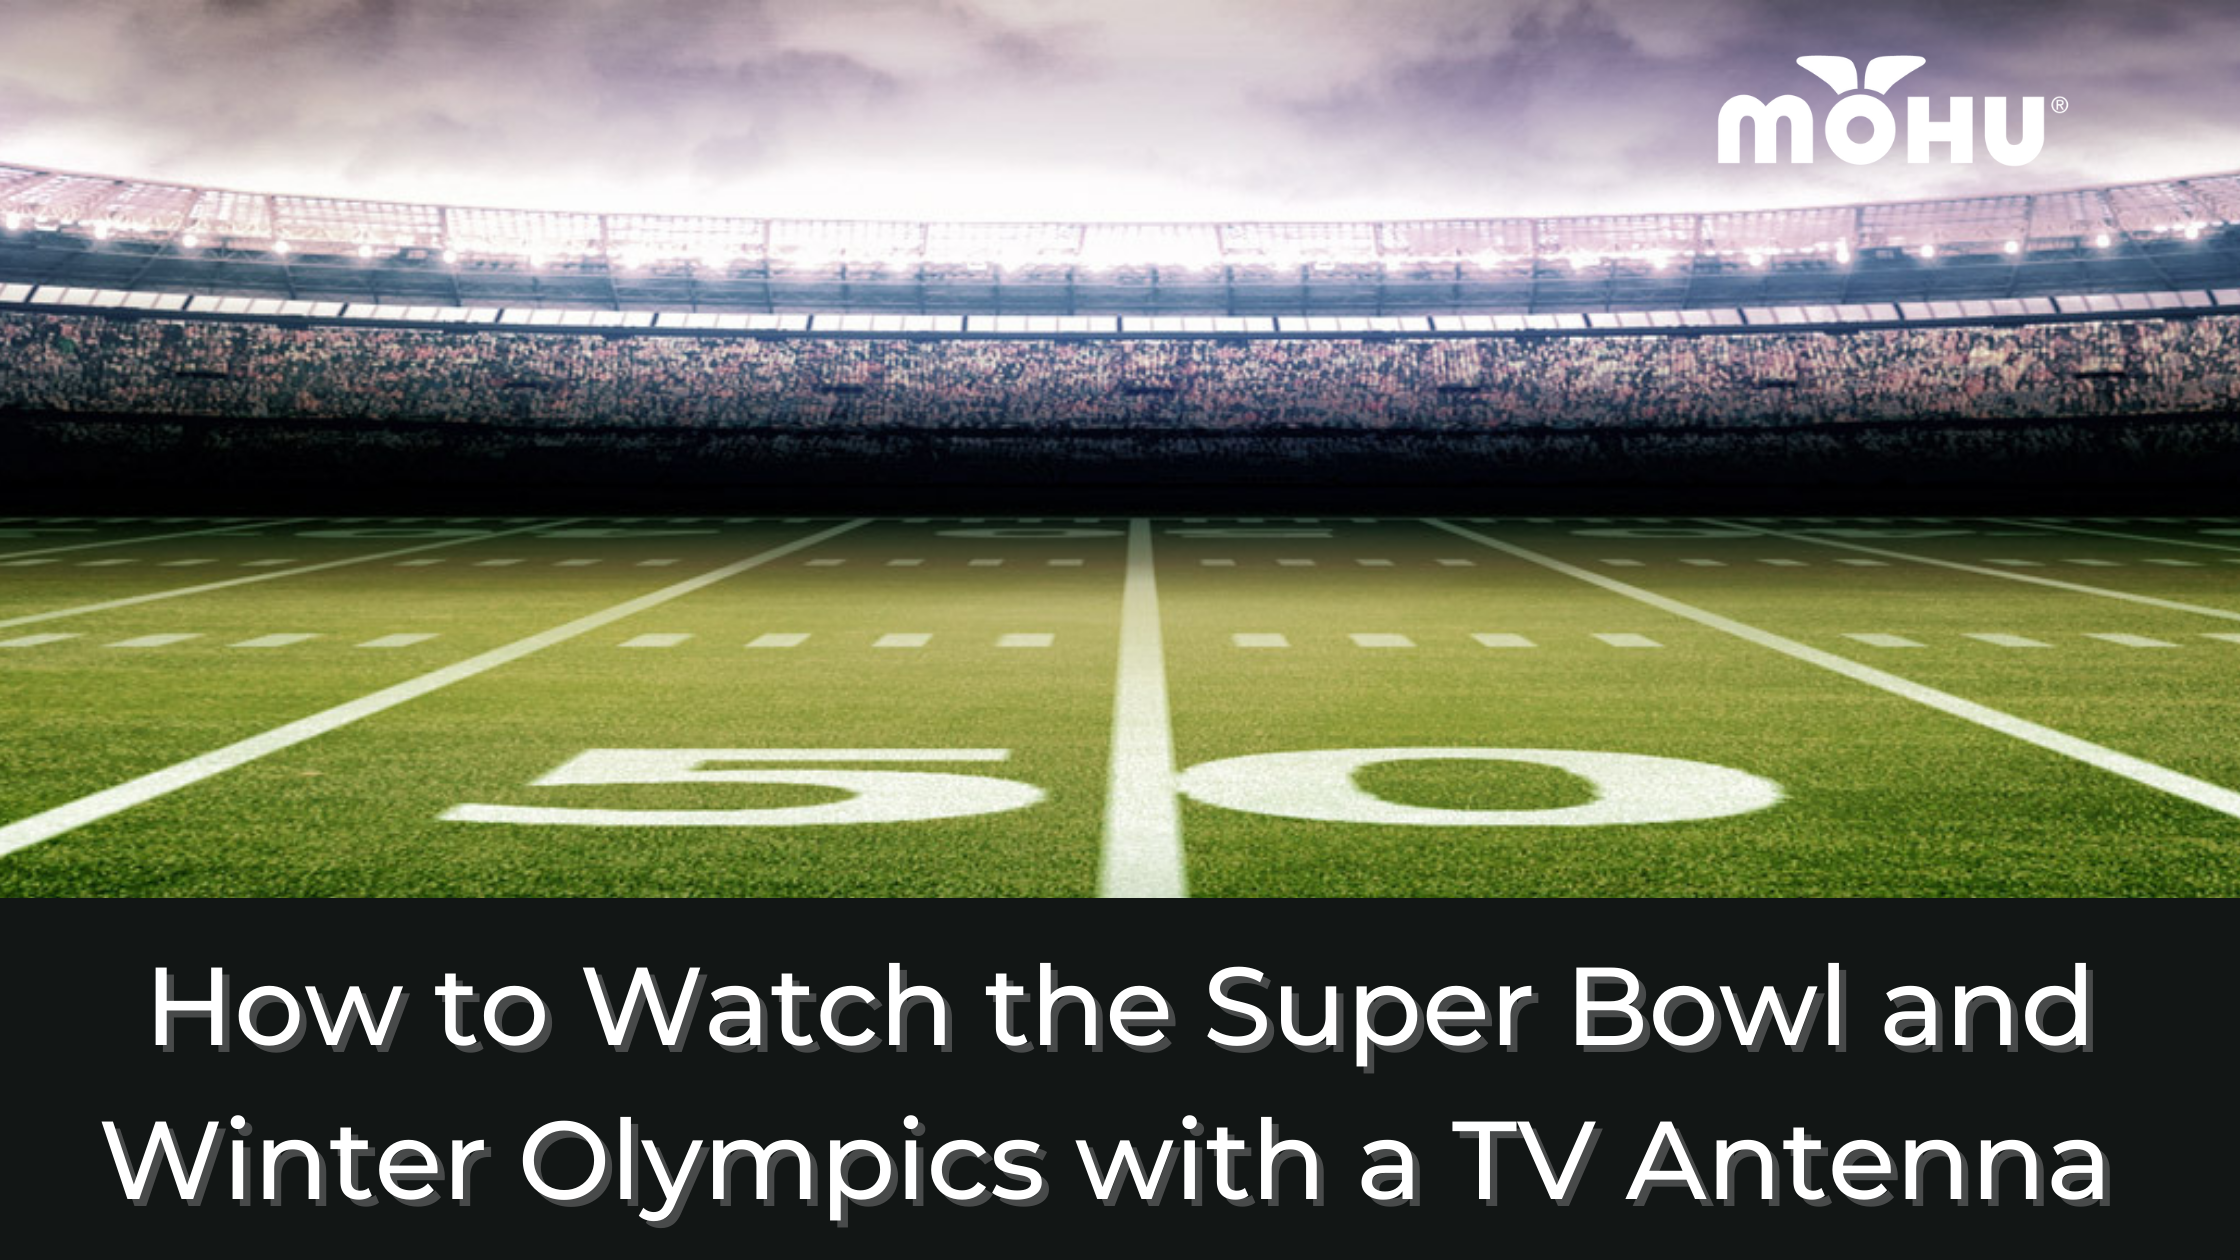 How to Watch The Super Bowl and Winter Olympics with a TV Antenna